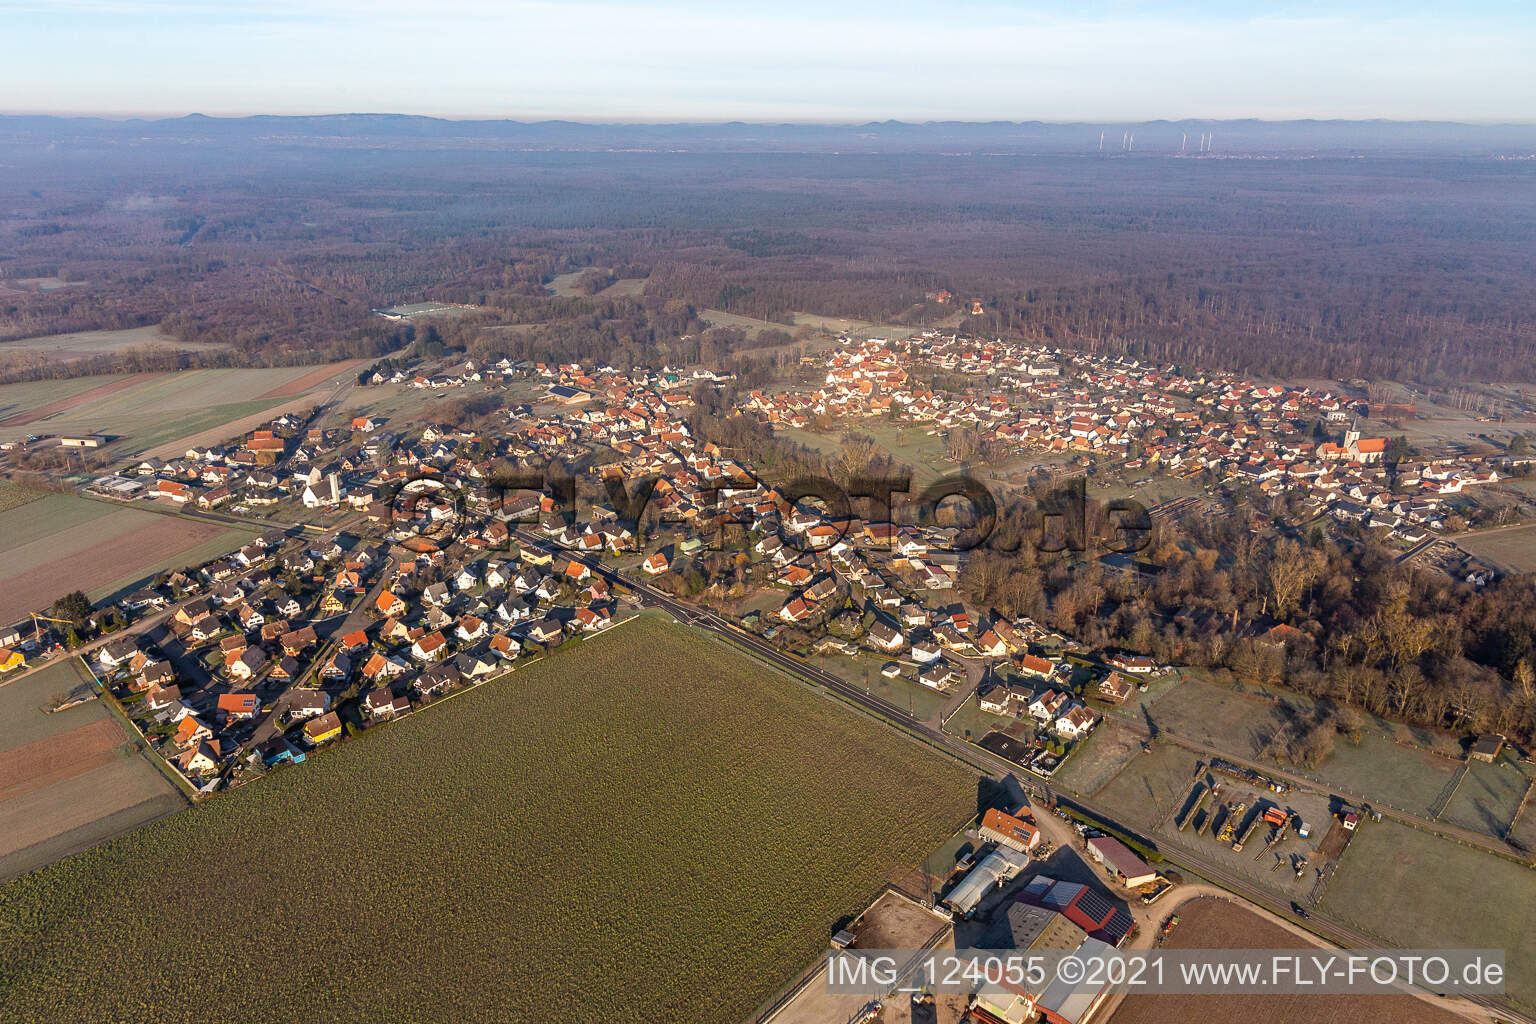 Scheibenhard in the state Bas-Rhin, France from a drone